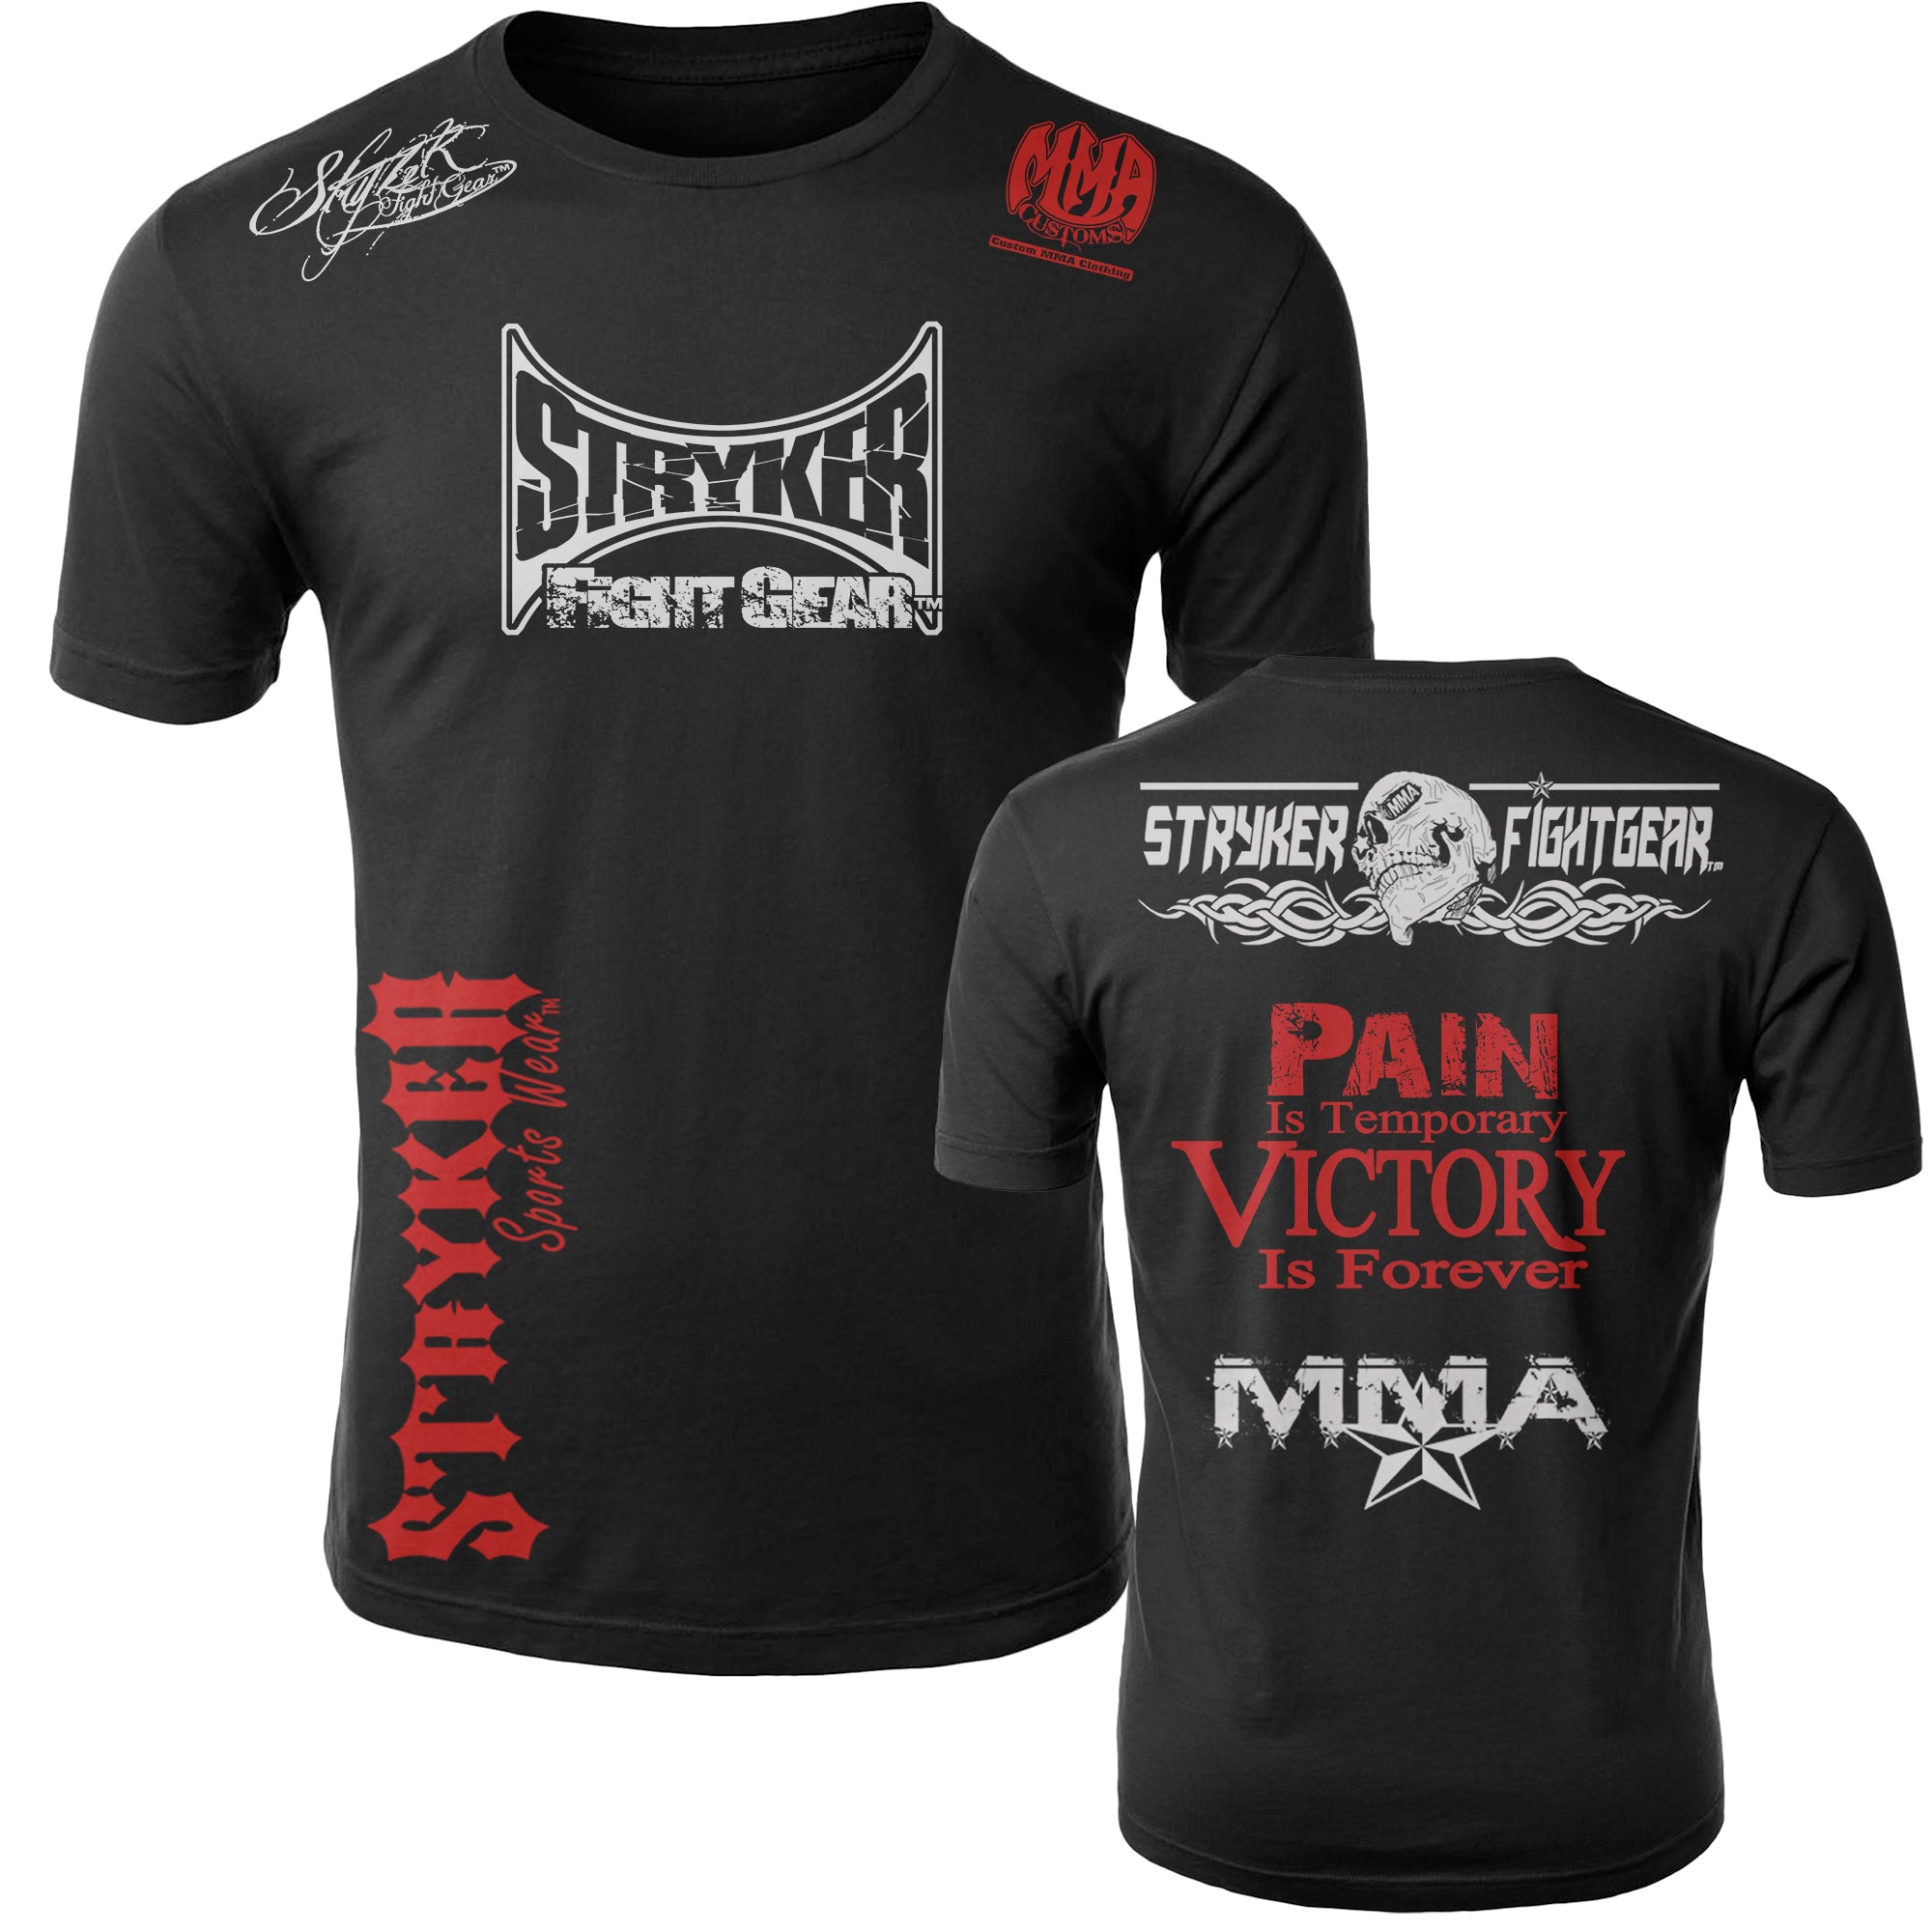  Stryker Fight Gear Pain is Temporary Victory is Forever MMA  Camiseta adulta negro - blanco verde Logos (5XL)